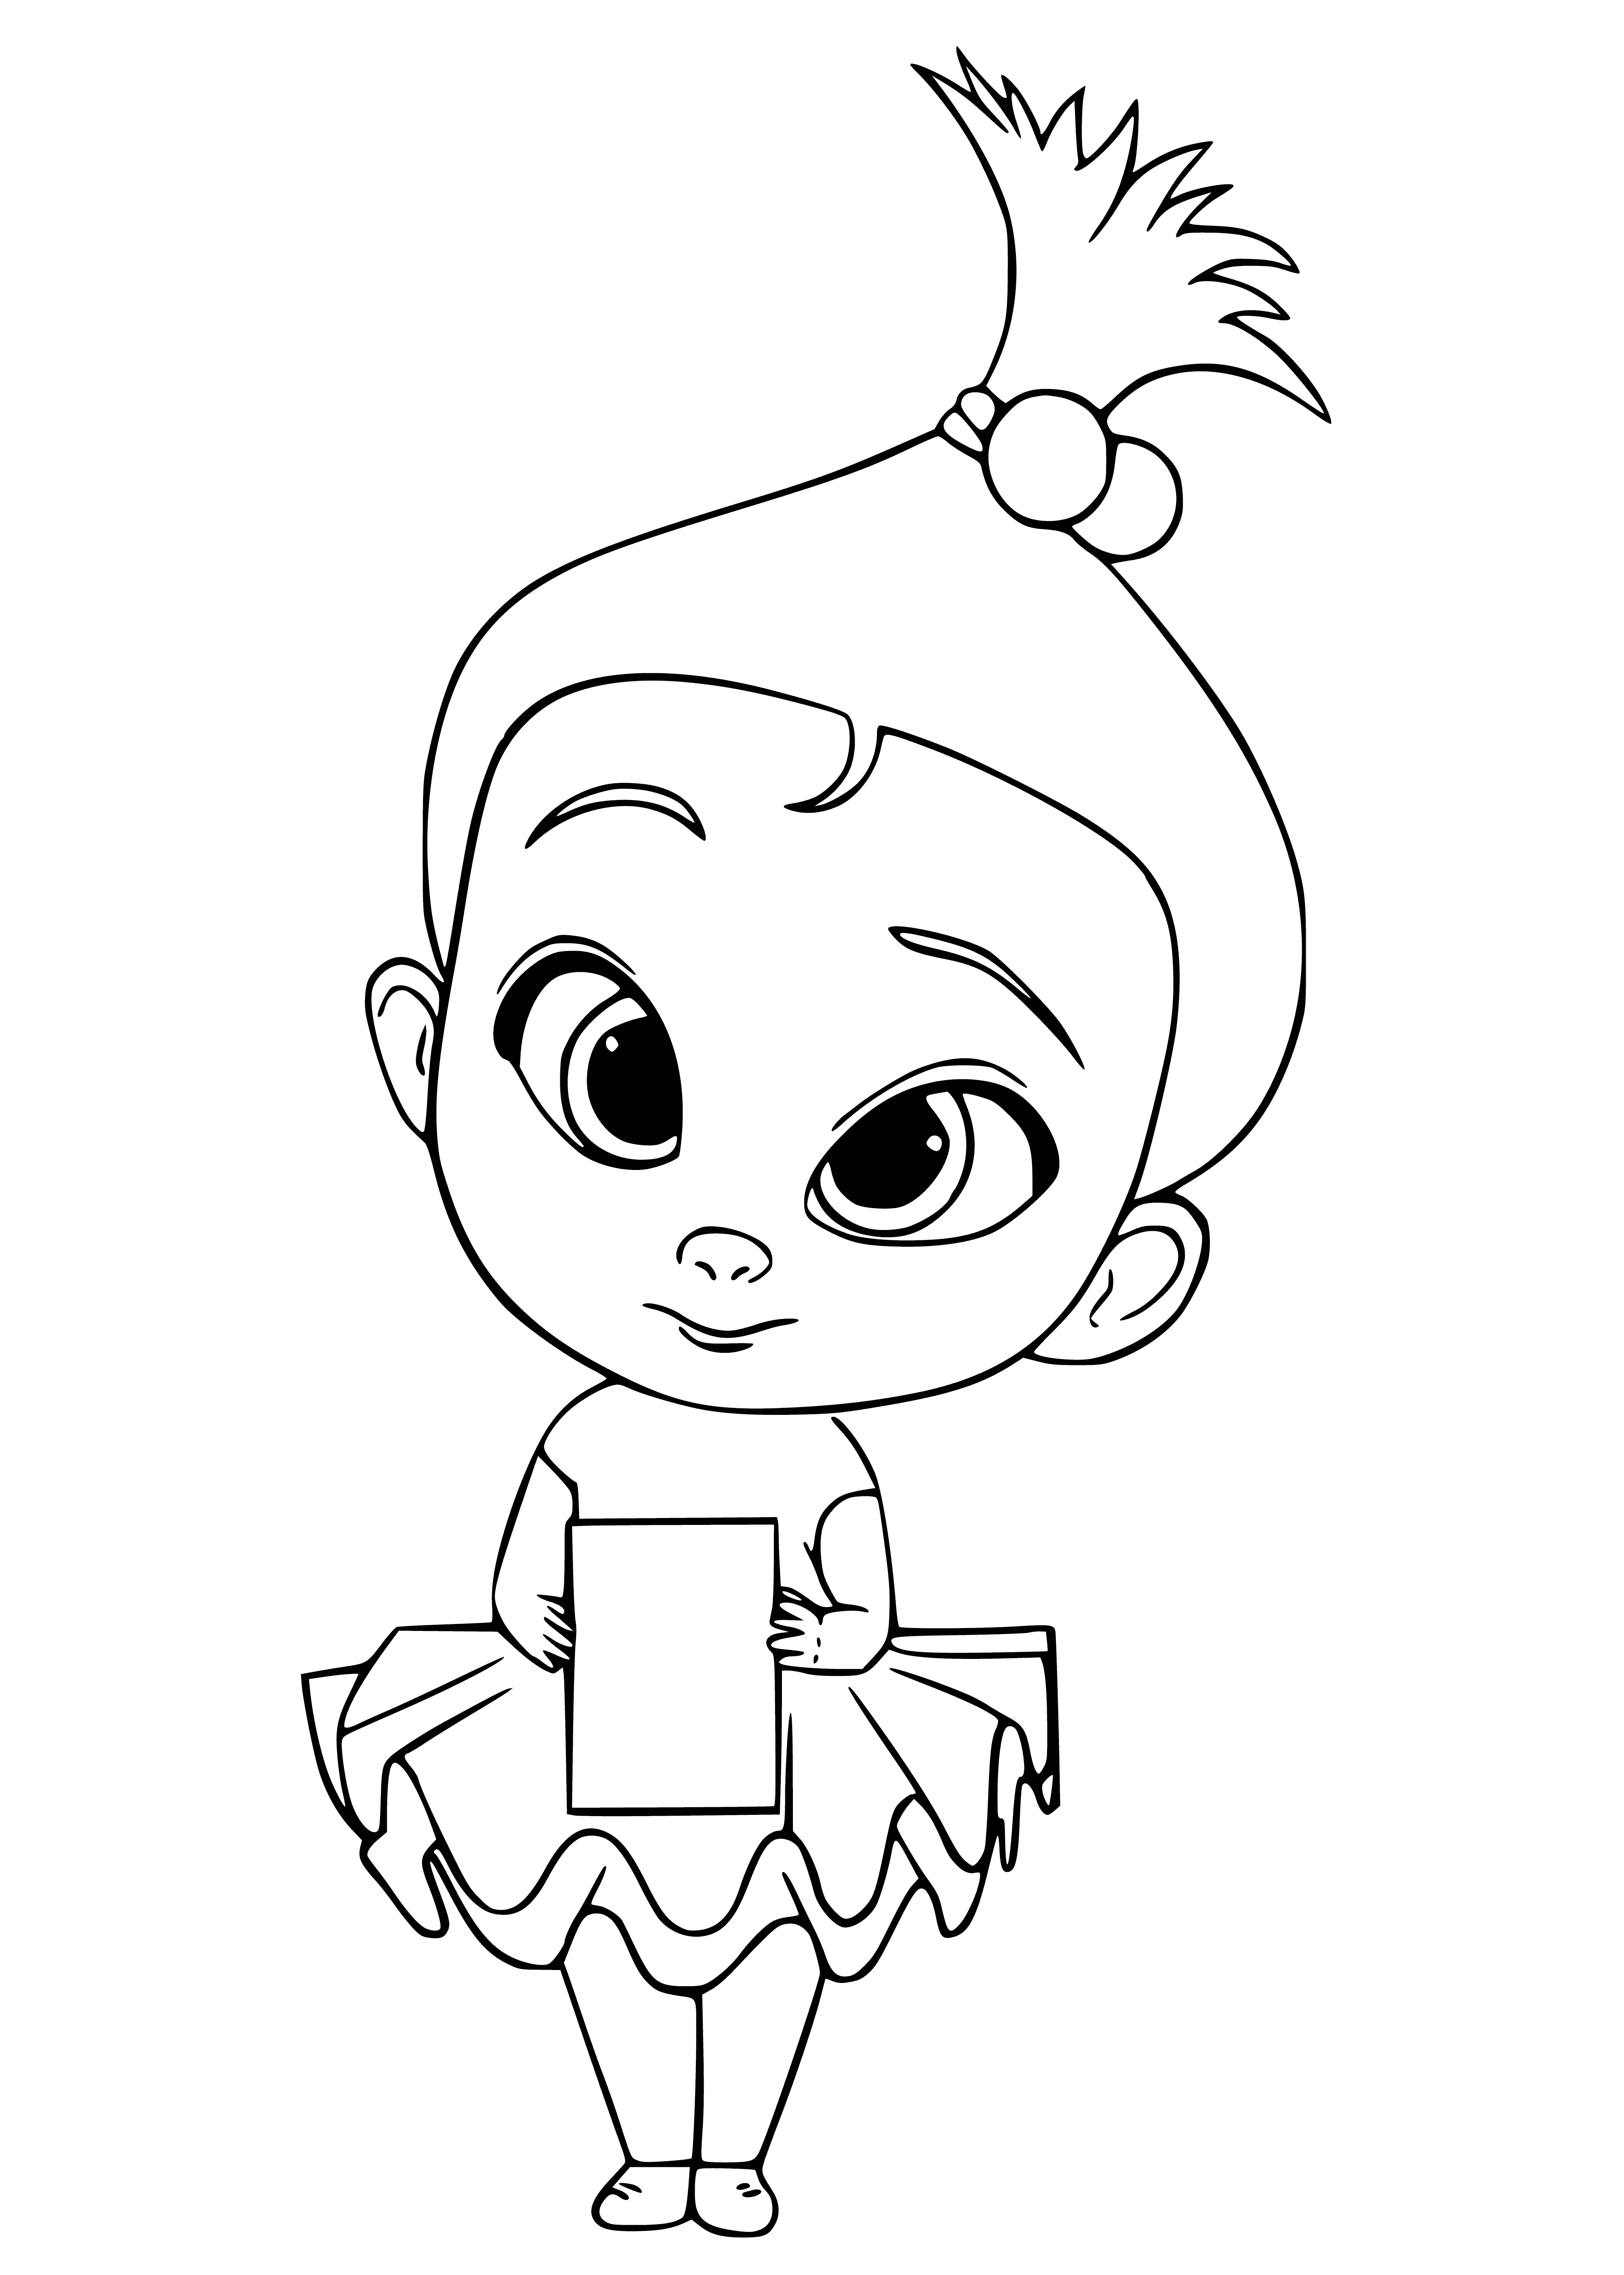 Stacey coloring page